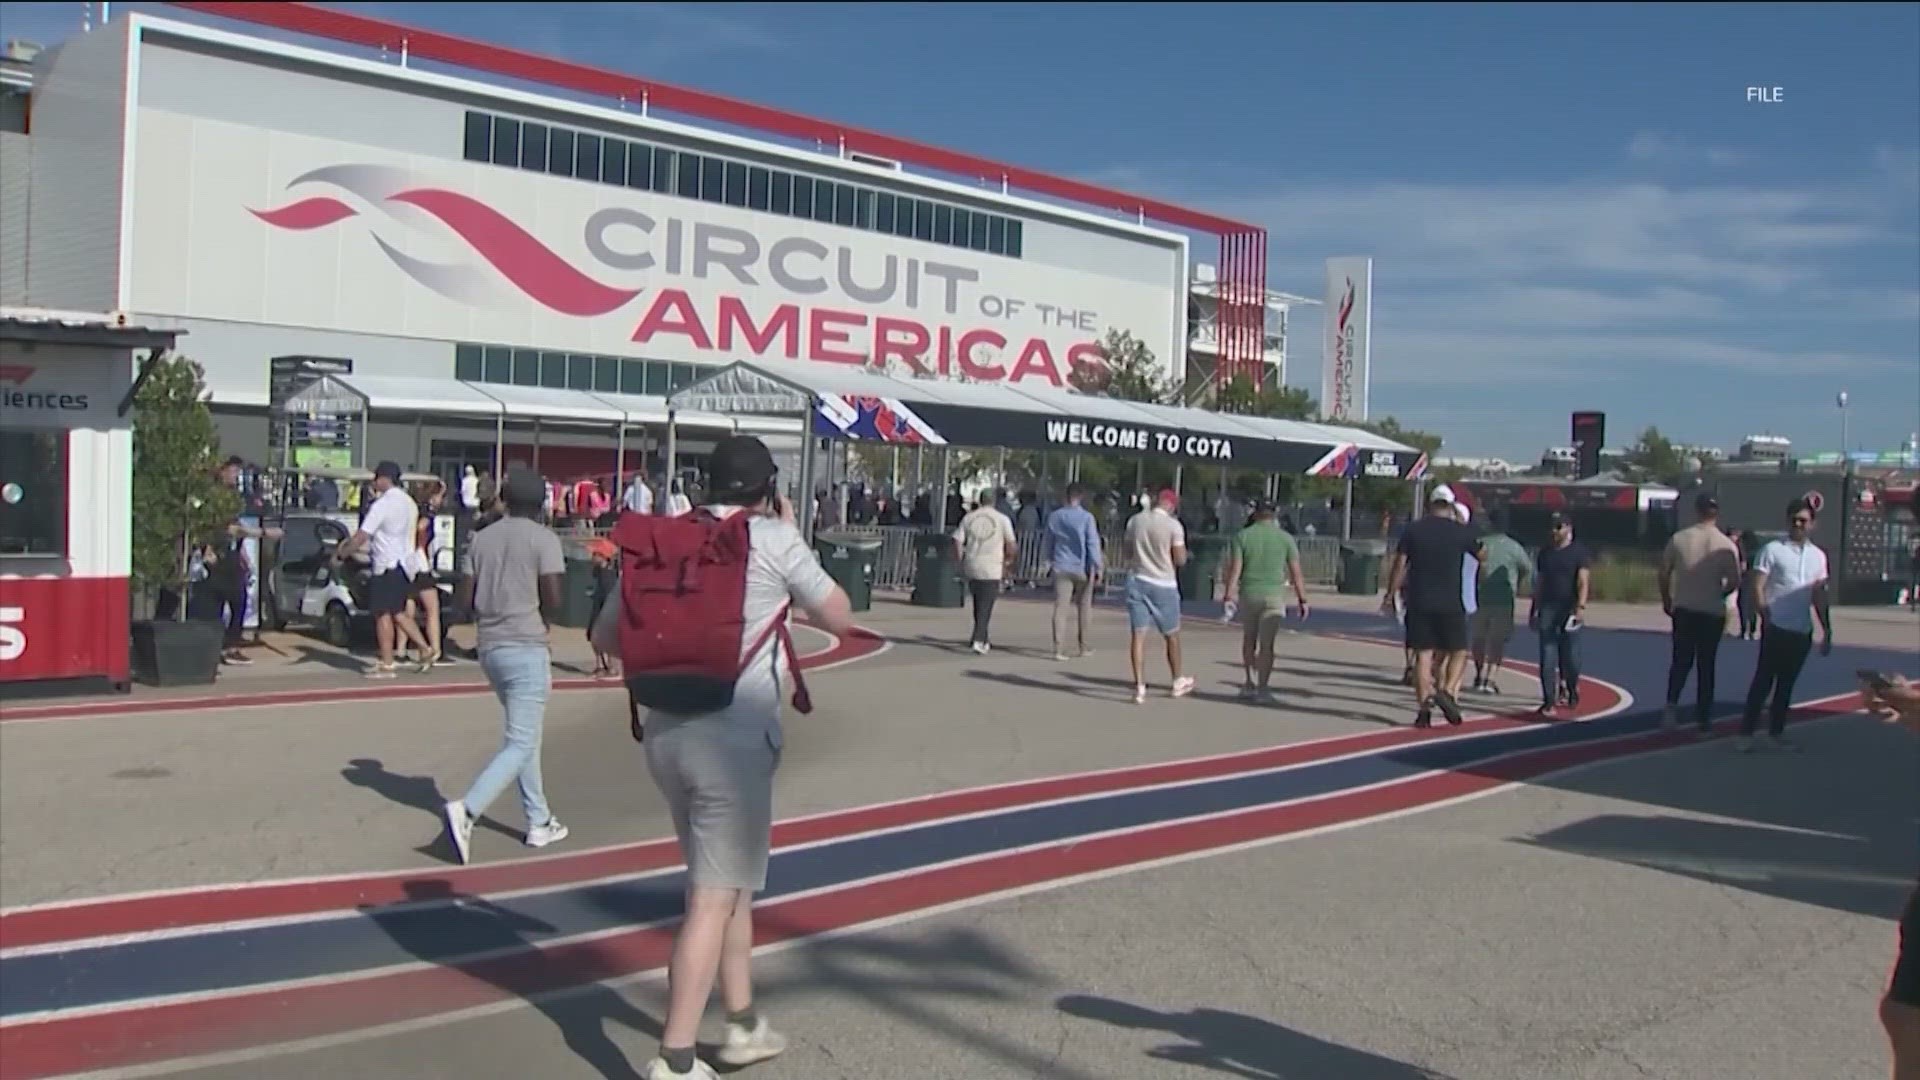 Formula One races back into Austin this weekend with the U.S. Grand Prix at the Circuit of the Americas. It will bring a big boost to Austin's economy.